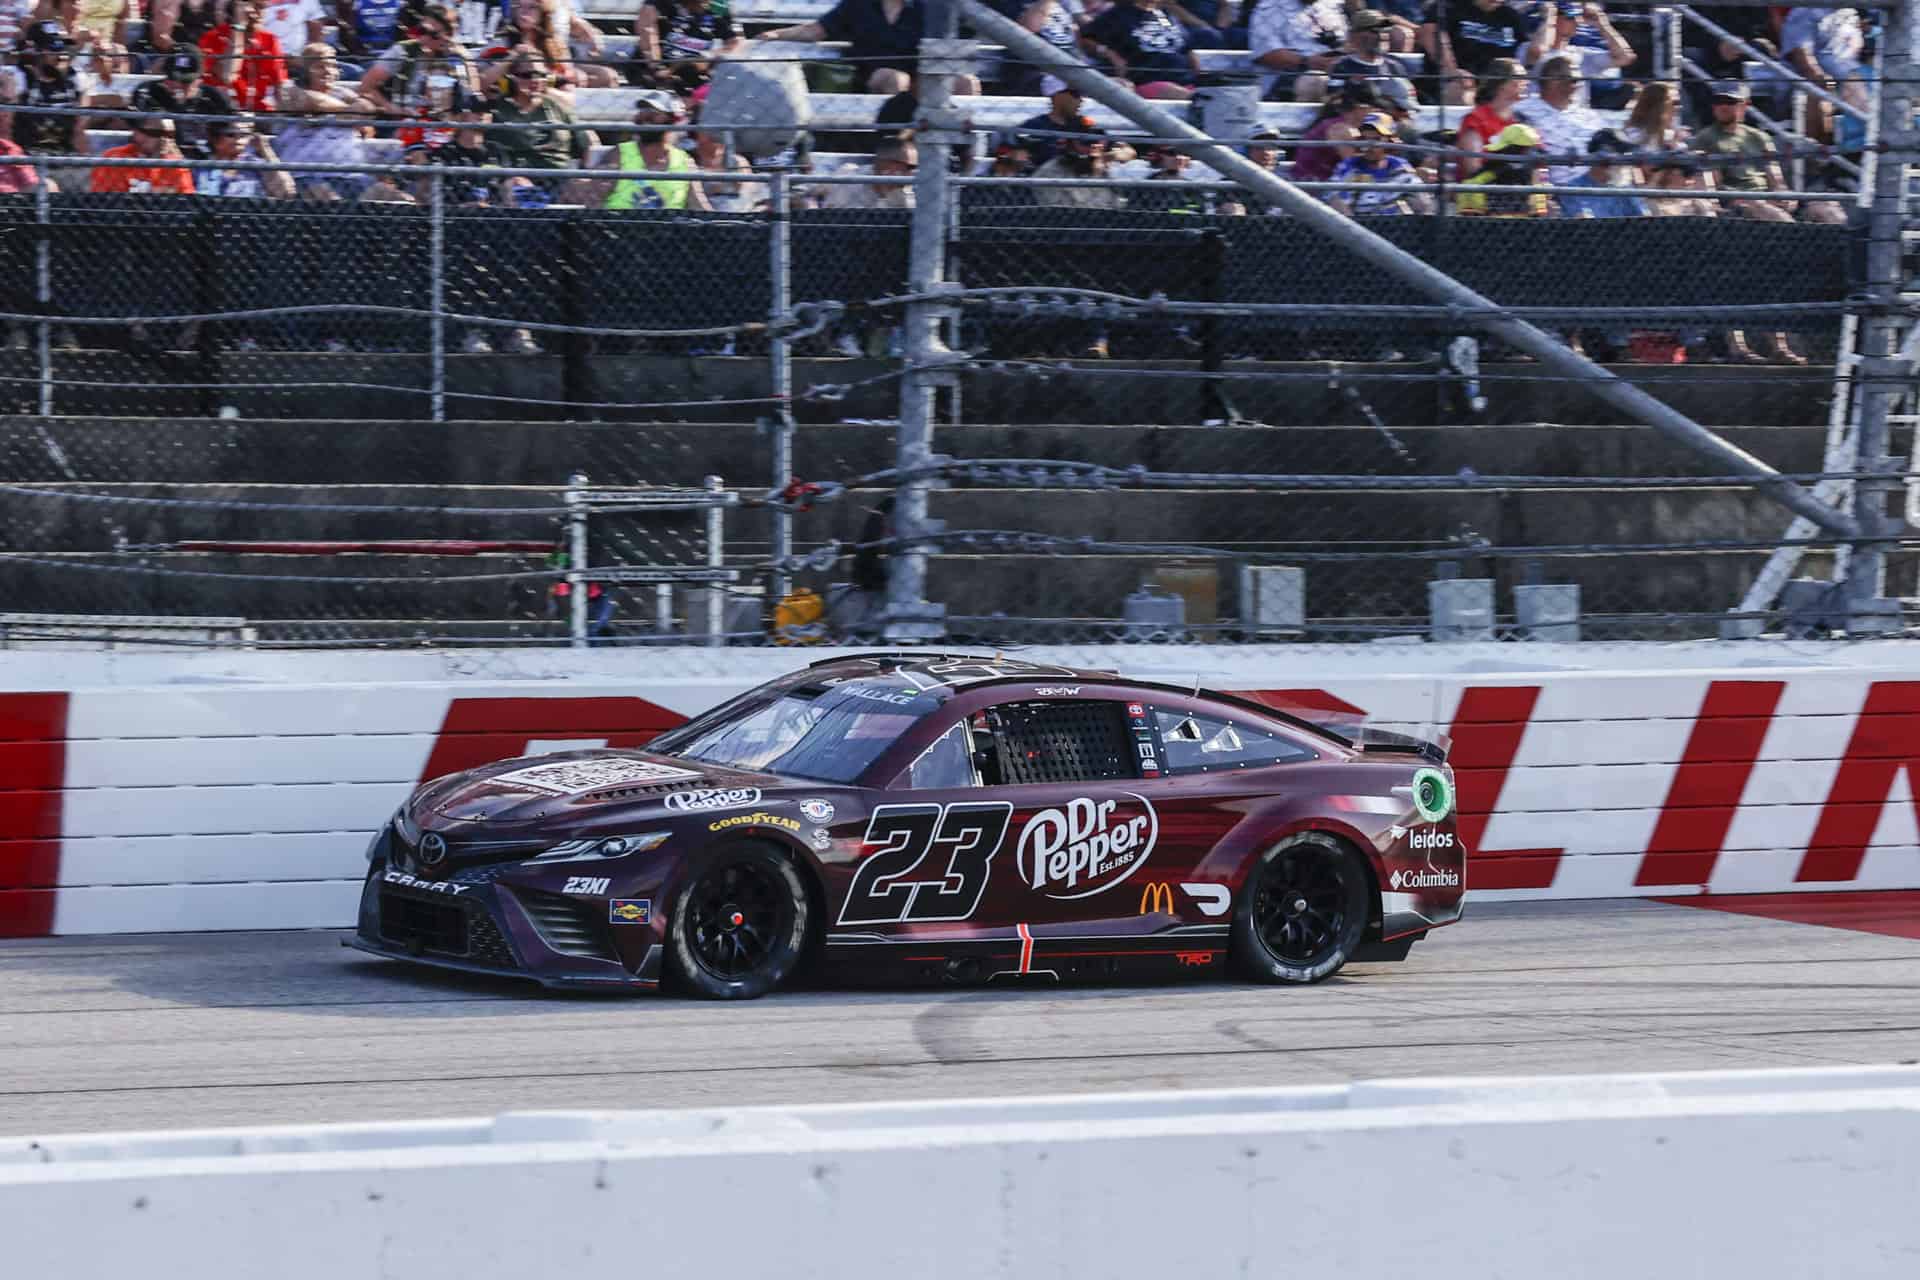 Bubba Wallace was frustrated despite a top-five finish as several cars collected in a late-race wreck were given their spots back at Darlington.